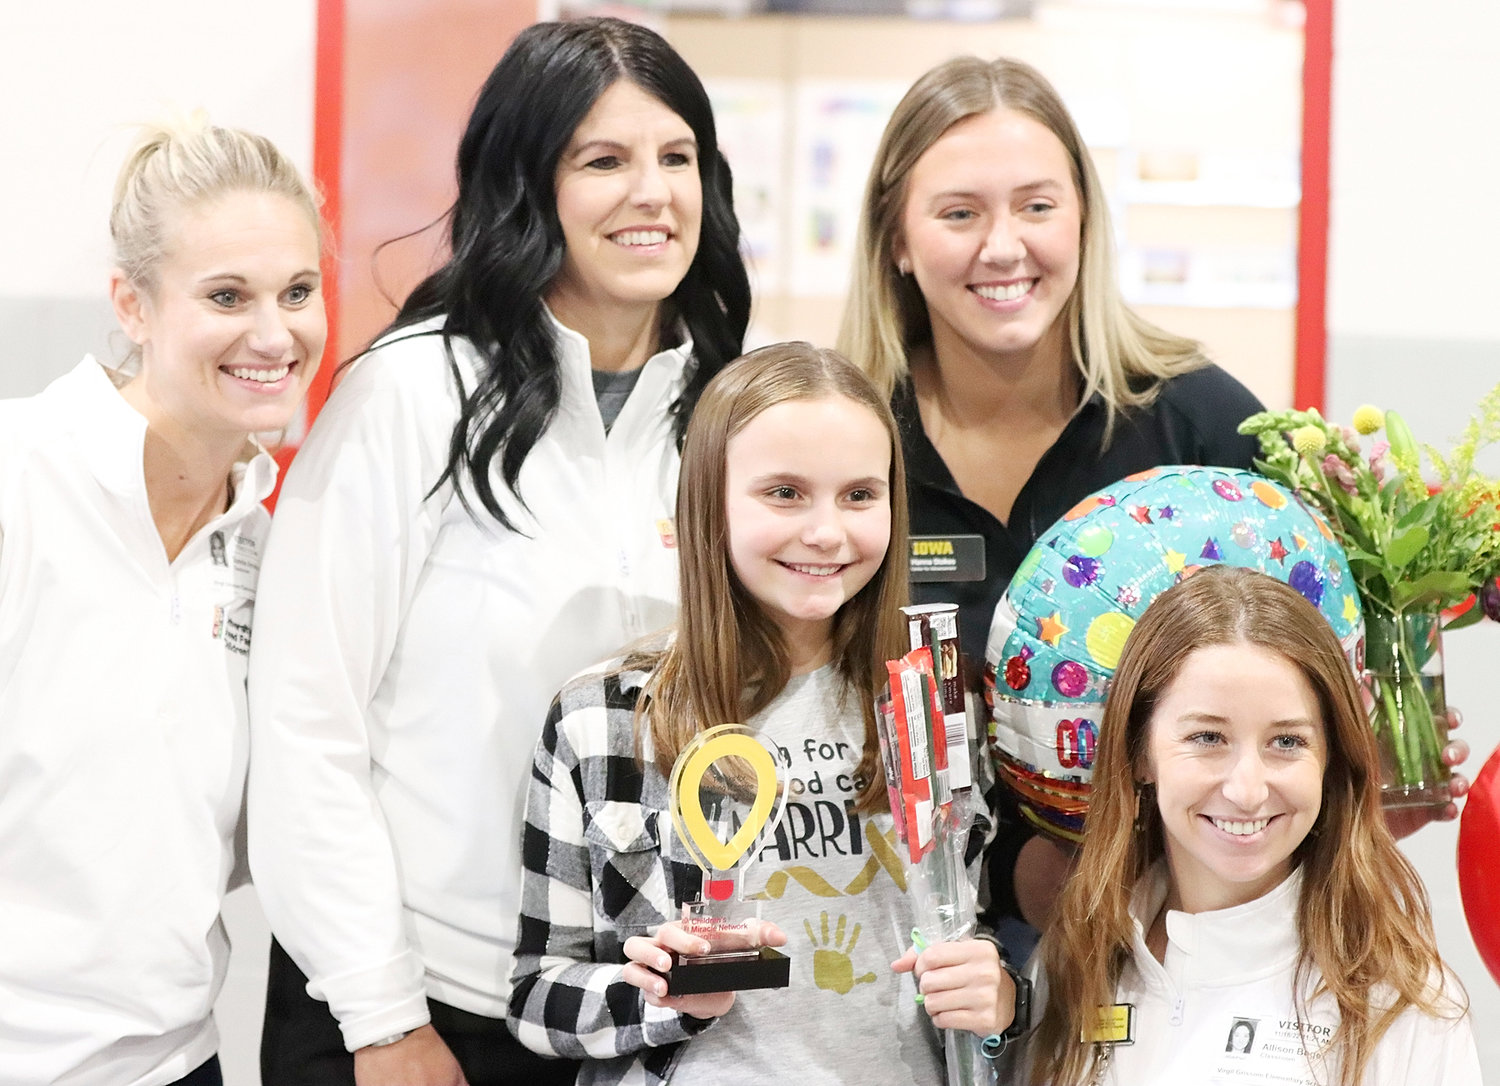 There were plenty of smiles in the Virgil Grissom lunch room on Friday when members of the University of Iowa's Stead Family Children's Hospital fundraising team were on hand to name fifth-grader Kinley Albrecht as their champion for 2023. Surrounding Kinley were (l-r): Sunnie Amelon, Andrea Chambers, Hanna Stokes, and 2016 North Scott graduate Allie (Stutting) Boge.